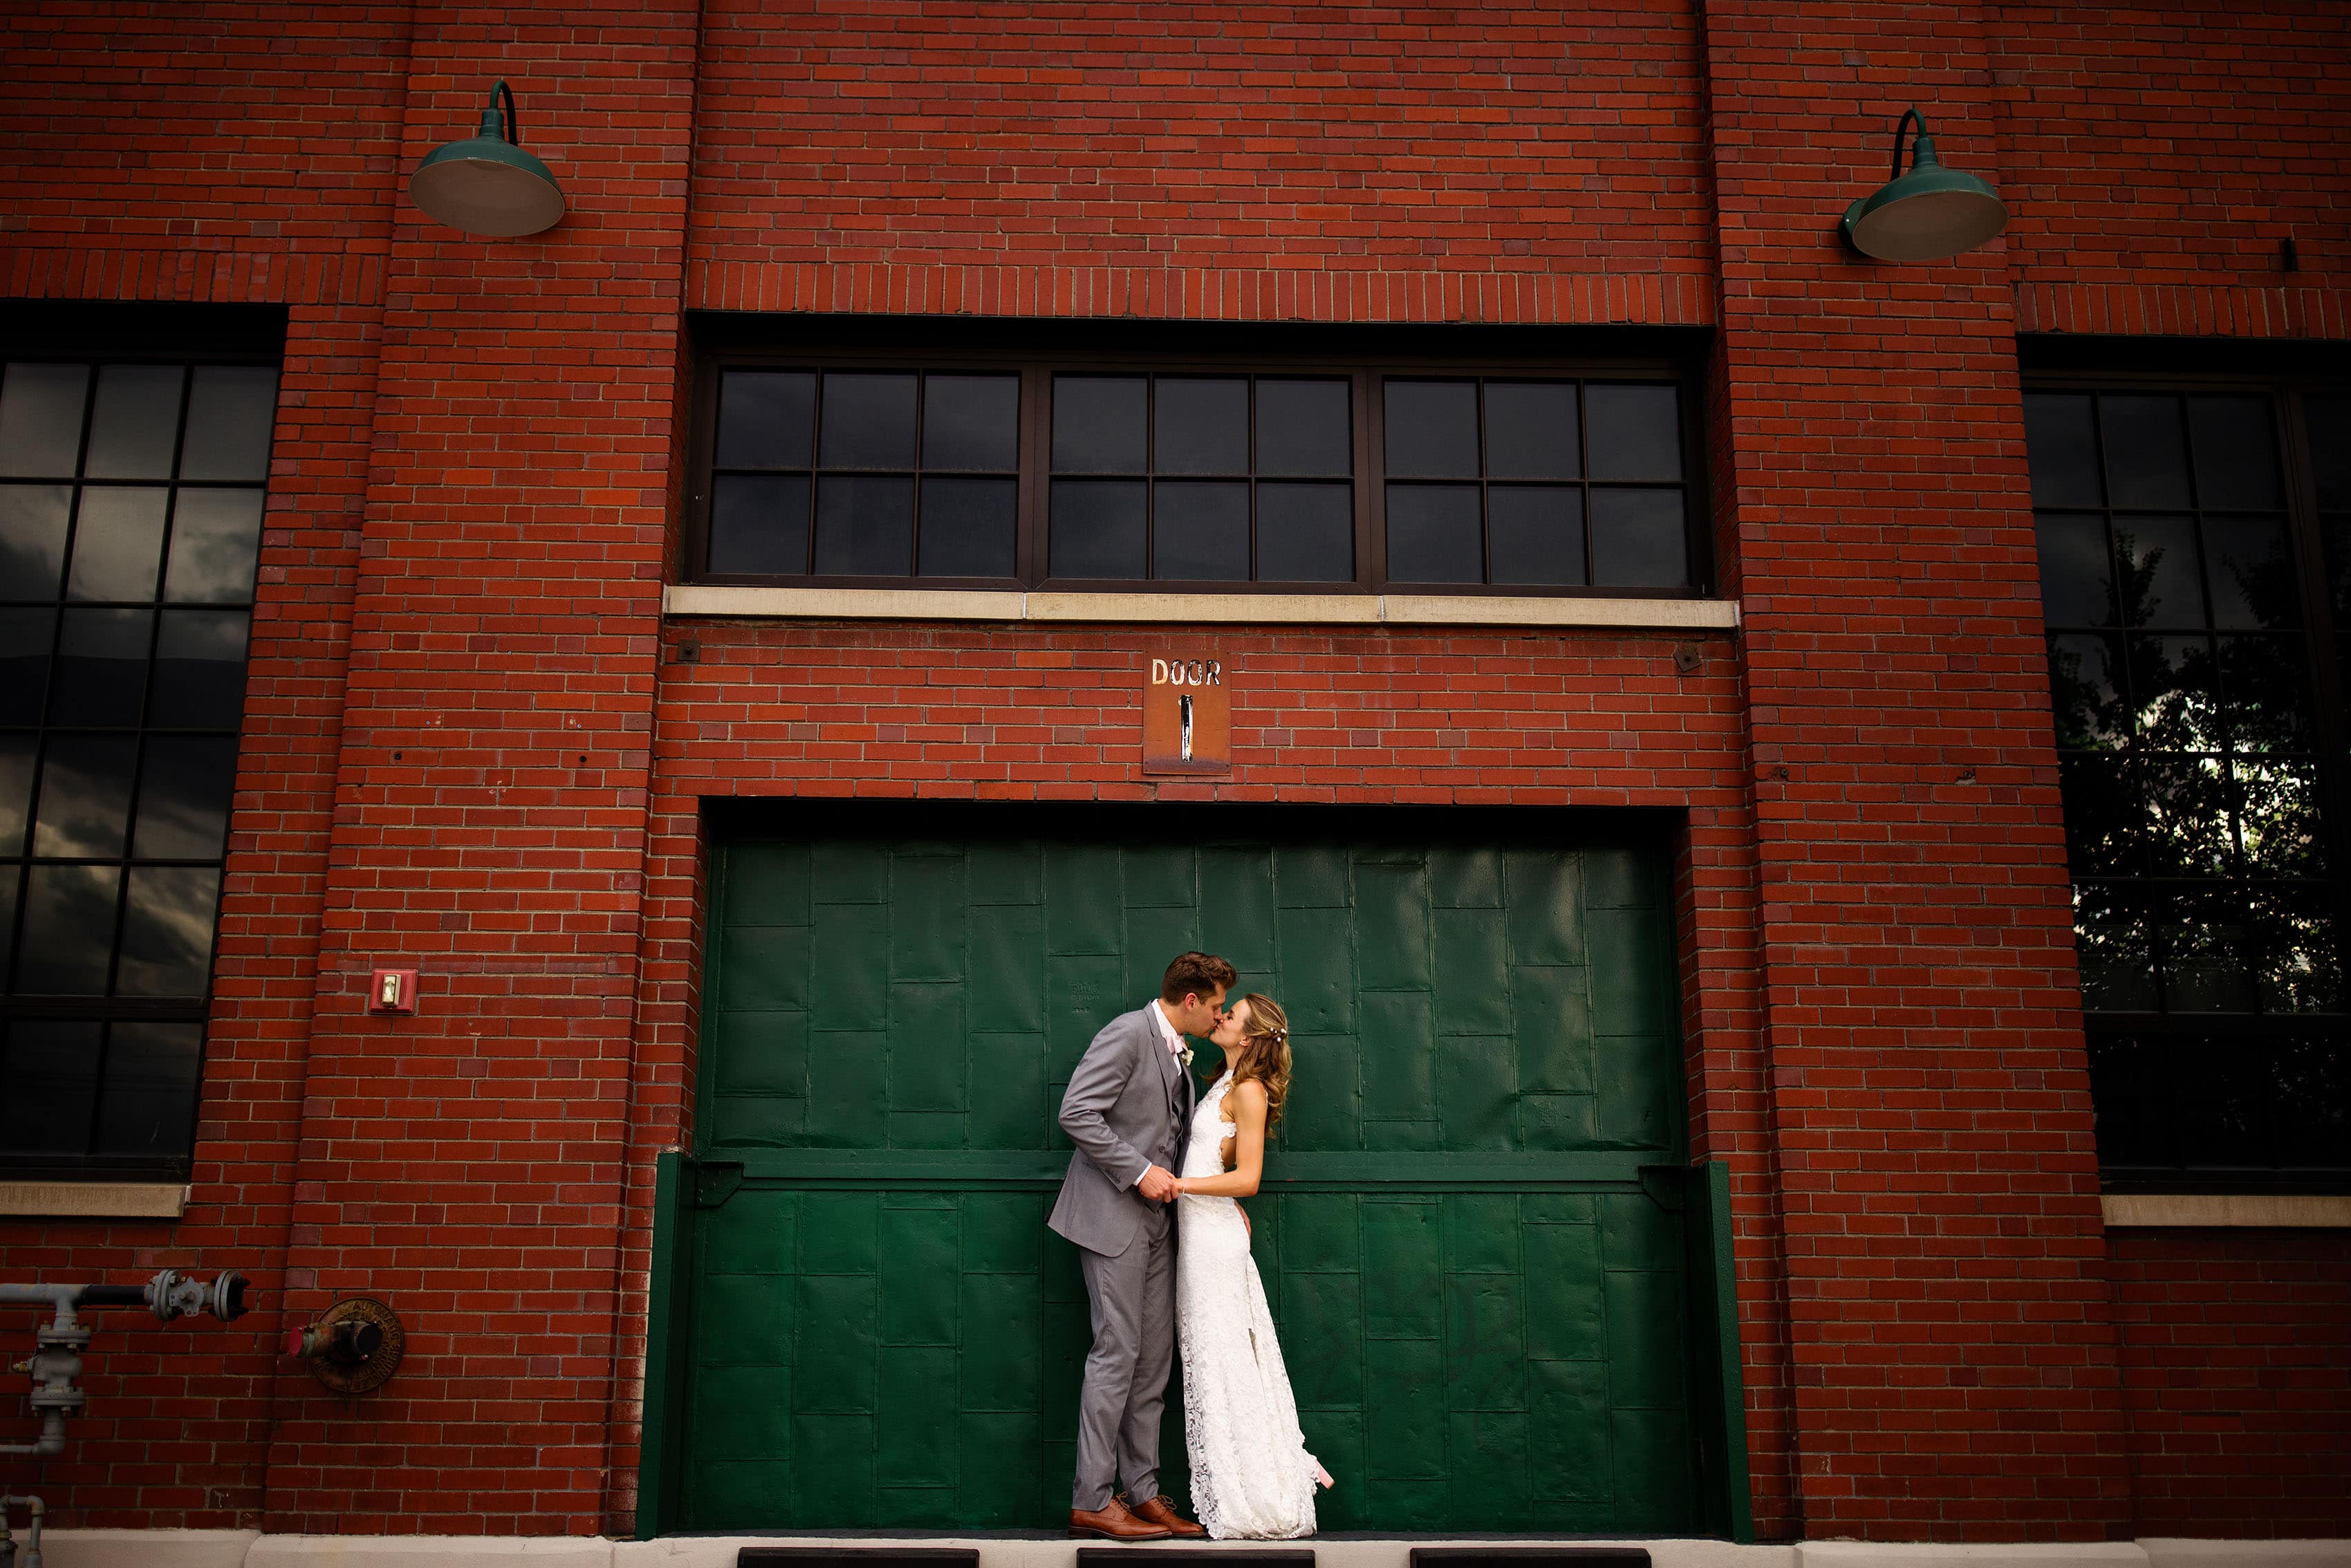 Willy and Kelly share a kiss at the Denver Dry Ice factory